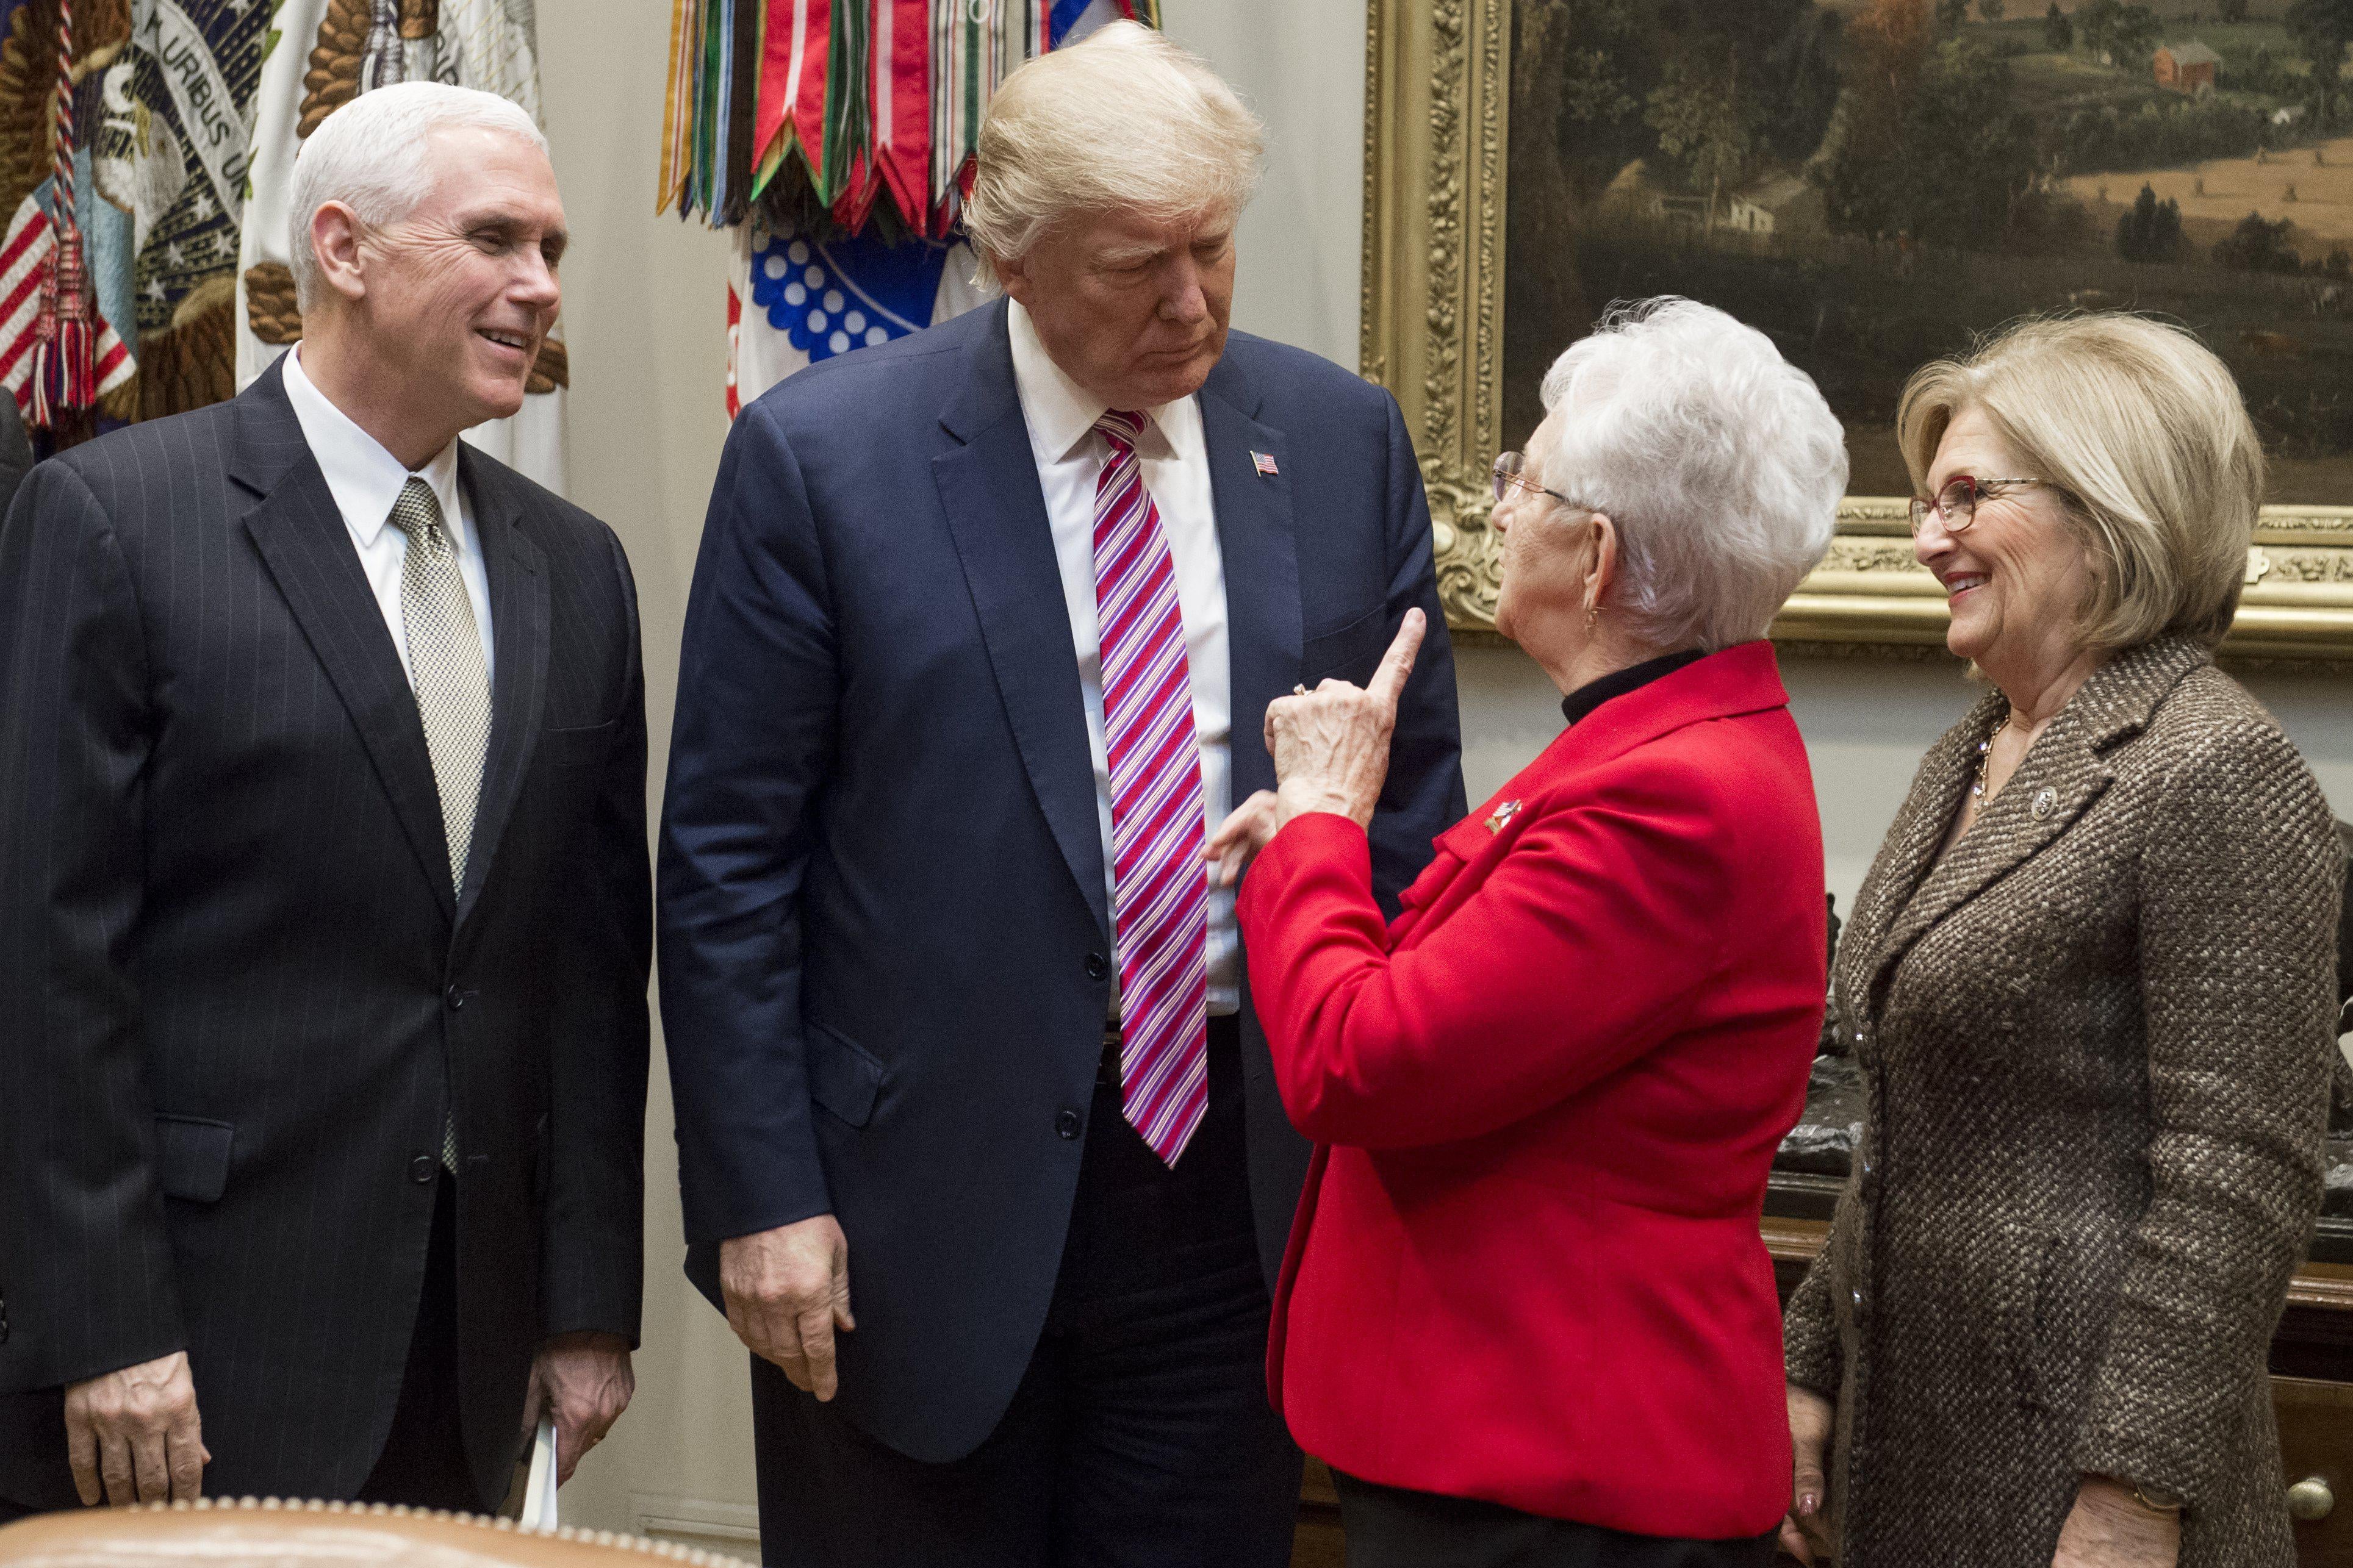 Donald Trump, alongside Mike Pence, arrives for a meeting with House committee chairs, including Rep. Diane Black.